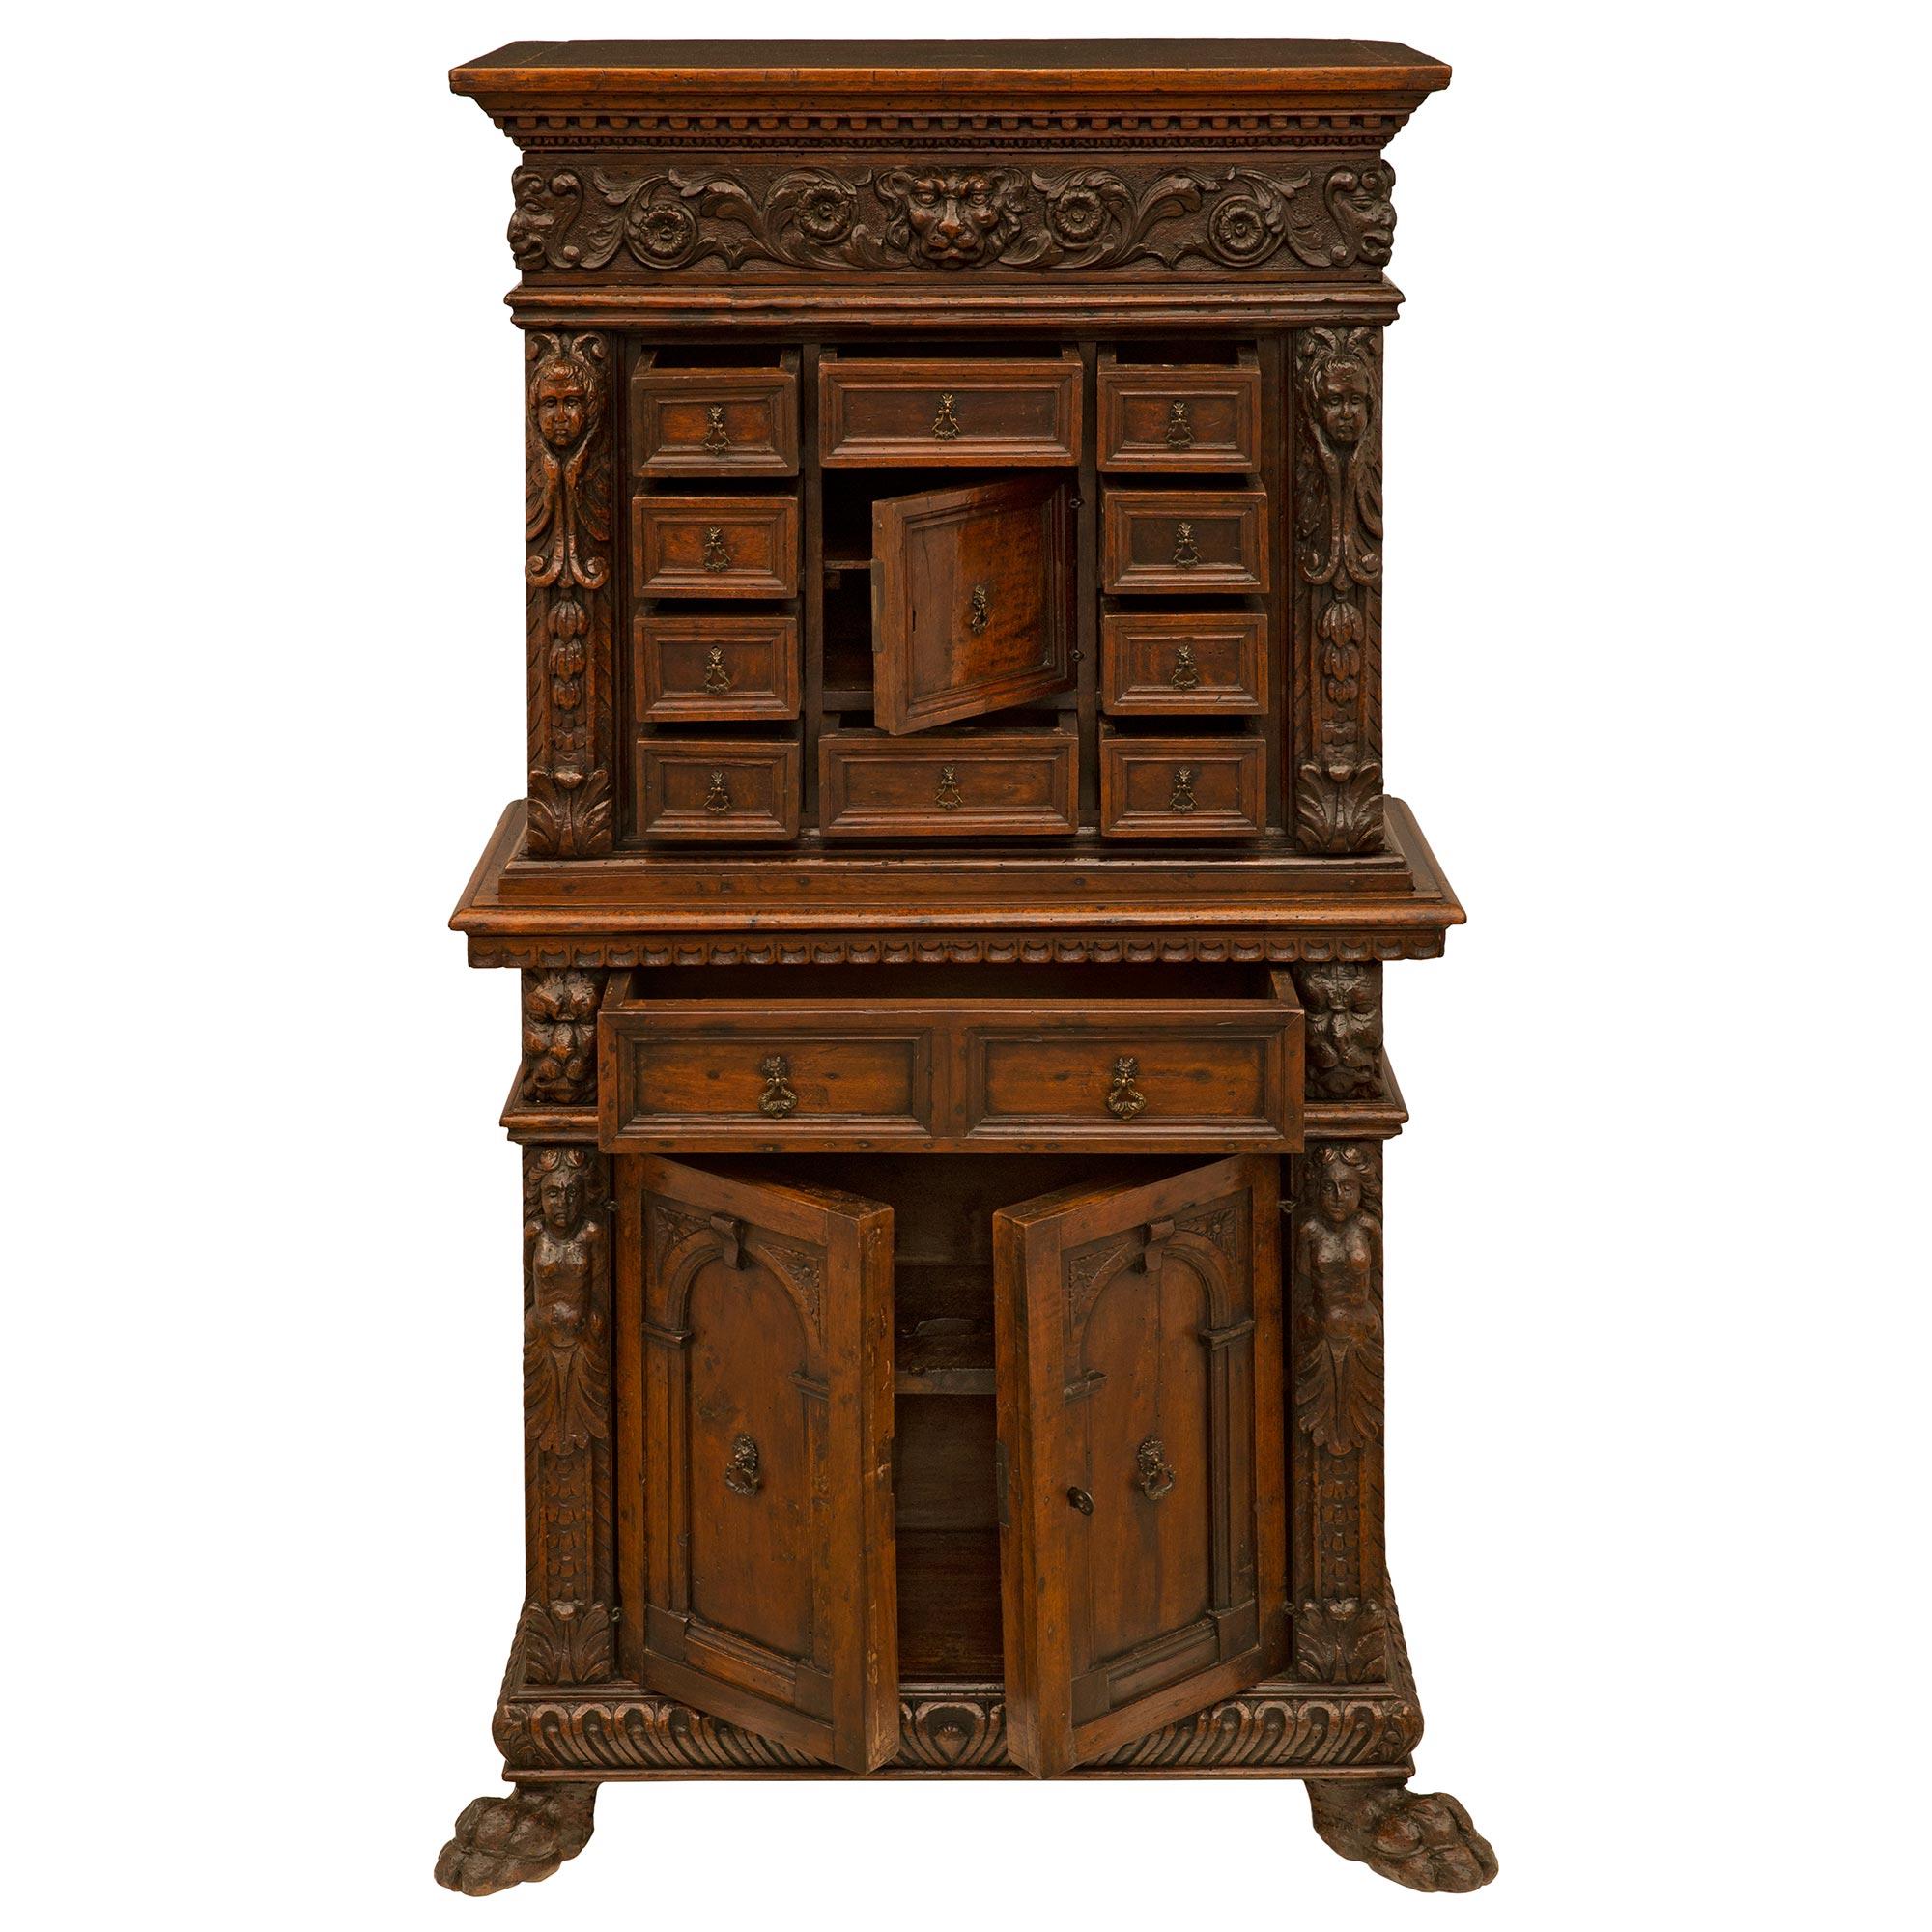 A handsome Italian 17th century Baroque period Walnut and iron specimen cabinet. The three door eleven drawer cabinet is raised by impressive paw feet below a mottled border with a striking reeded gadroon like design. At the center are two doors